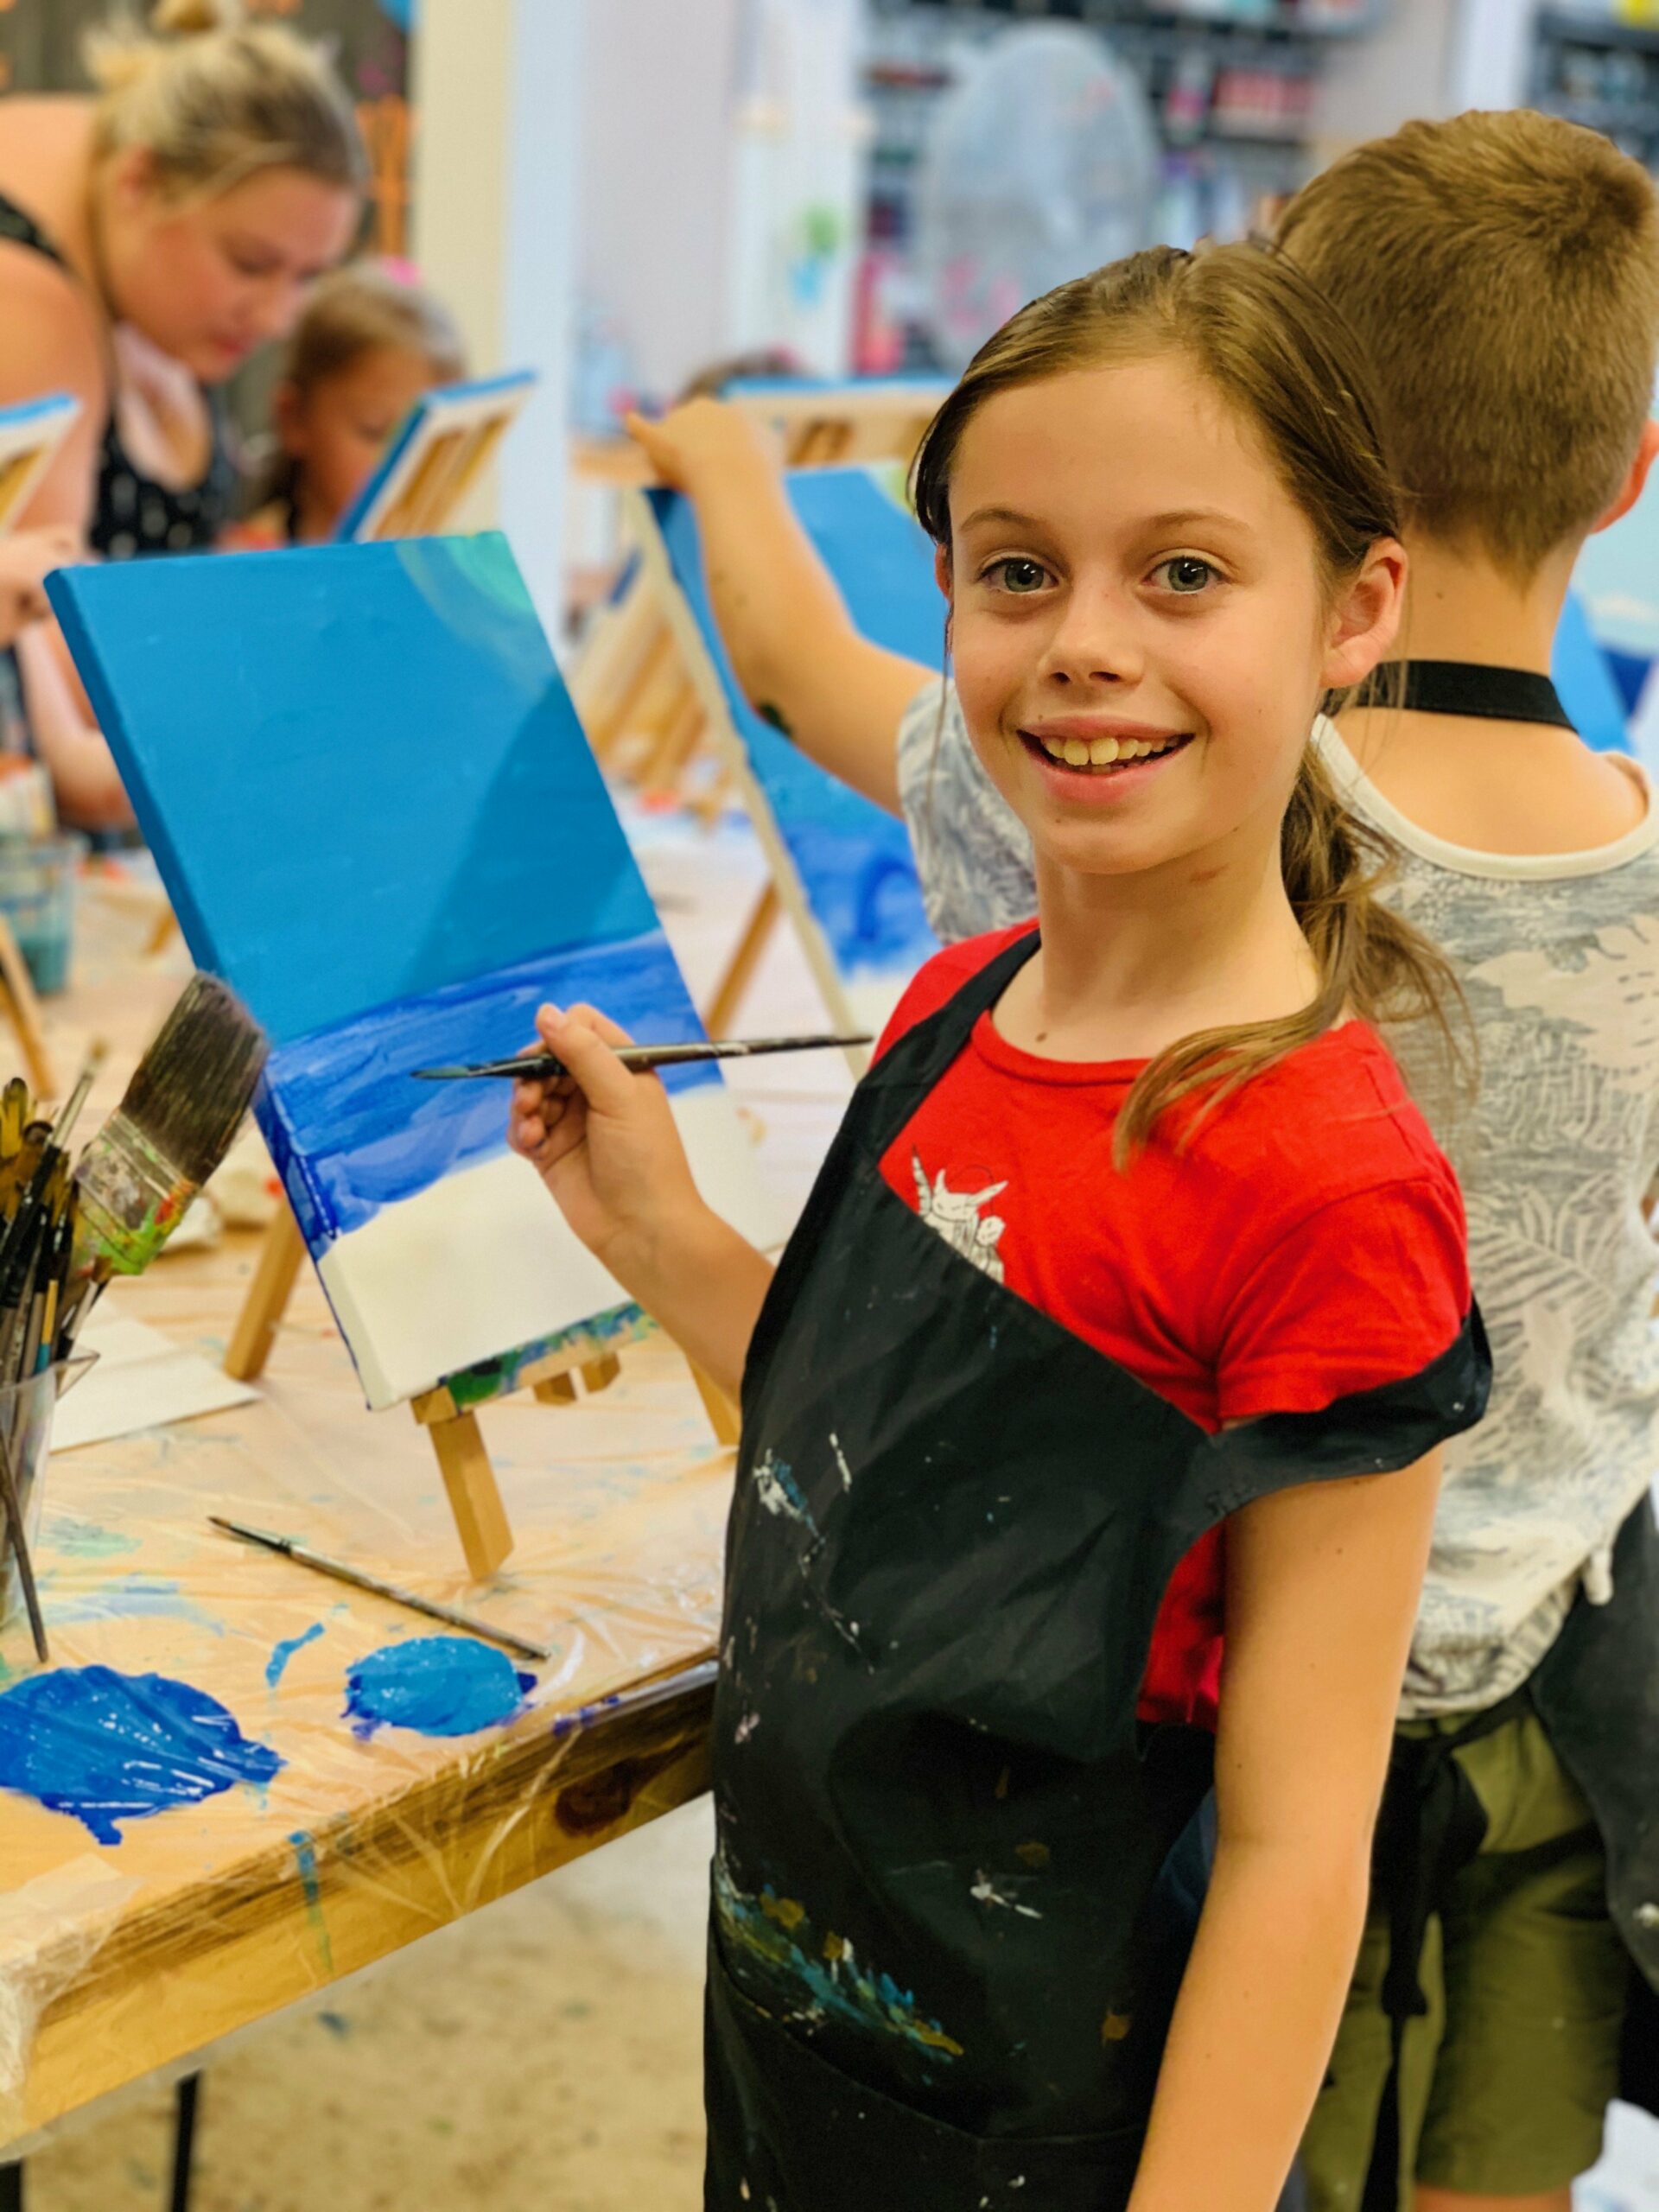 School Holiday 4hr Workshops - Whale of a Time Painting, Ocean Spring Globes, Pool Noodle Bath Fishies